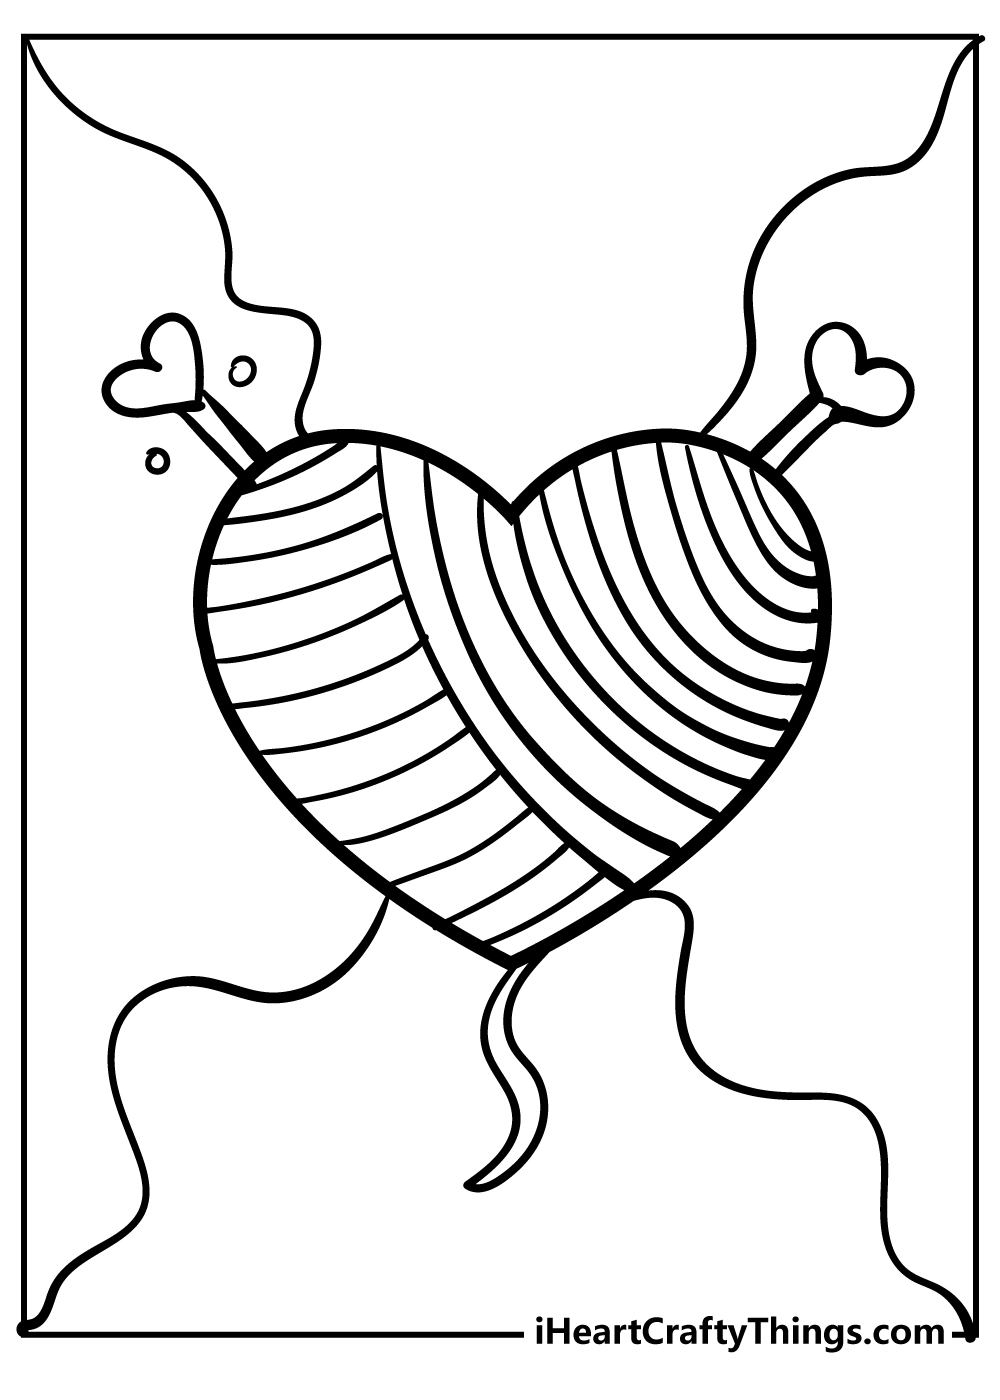 Heart coloring pages free printables